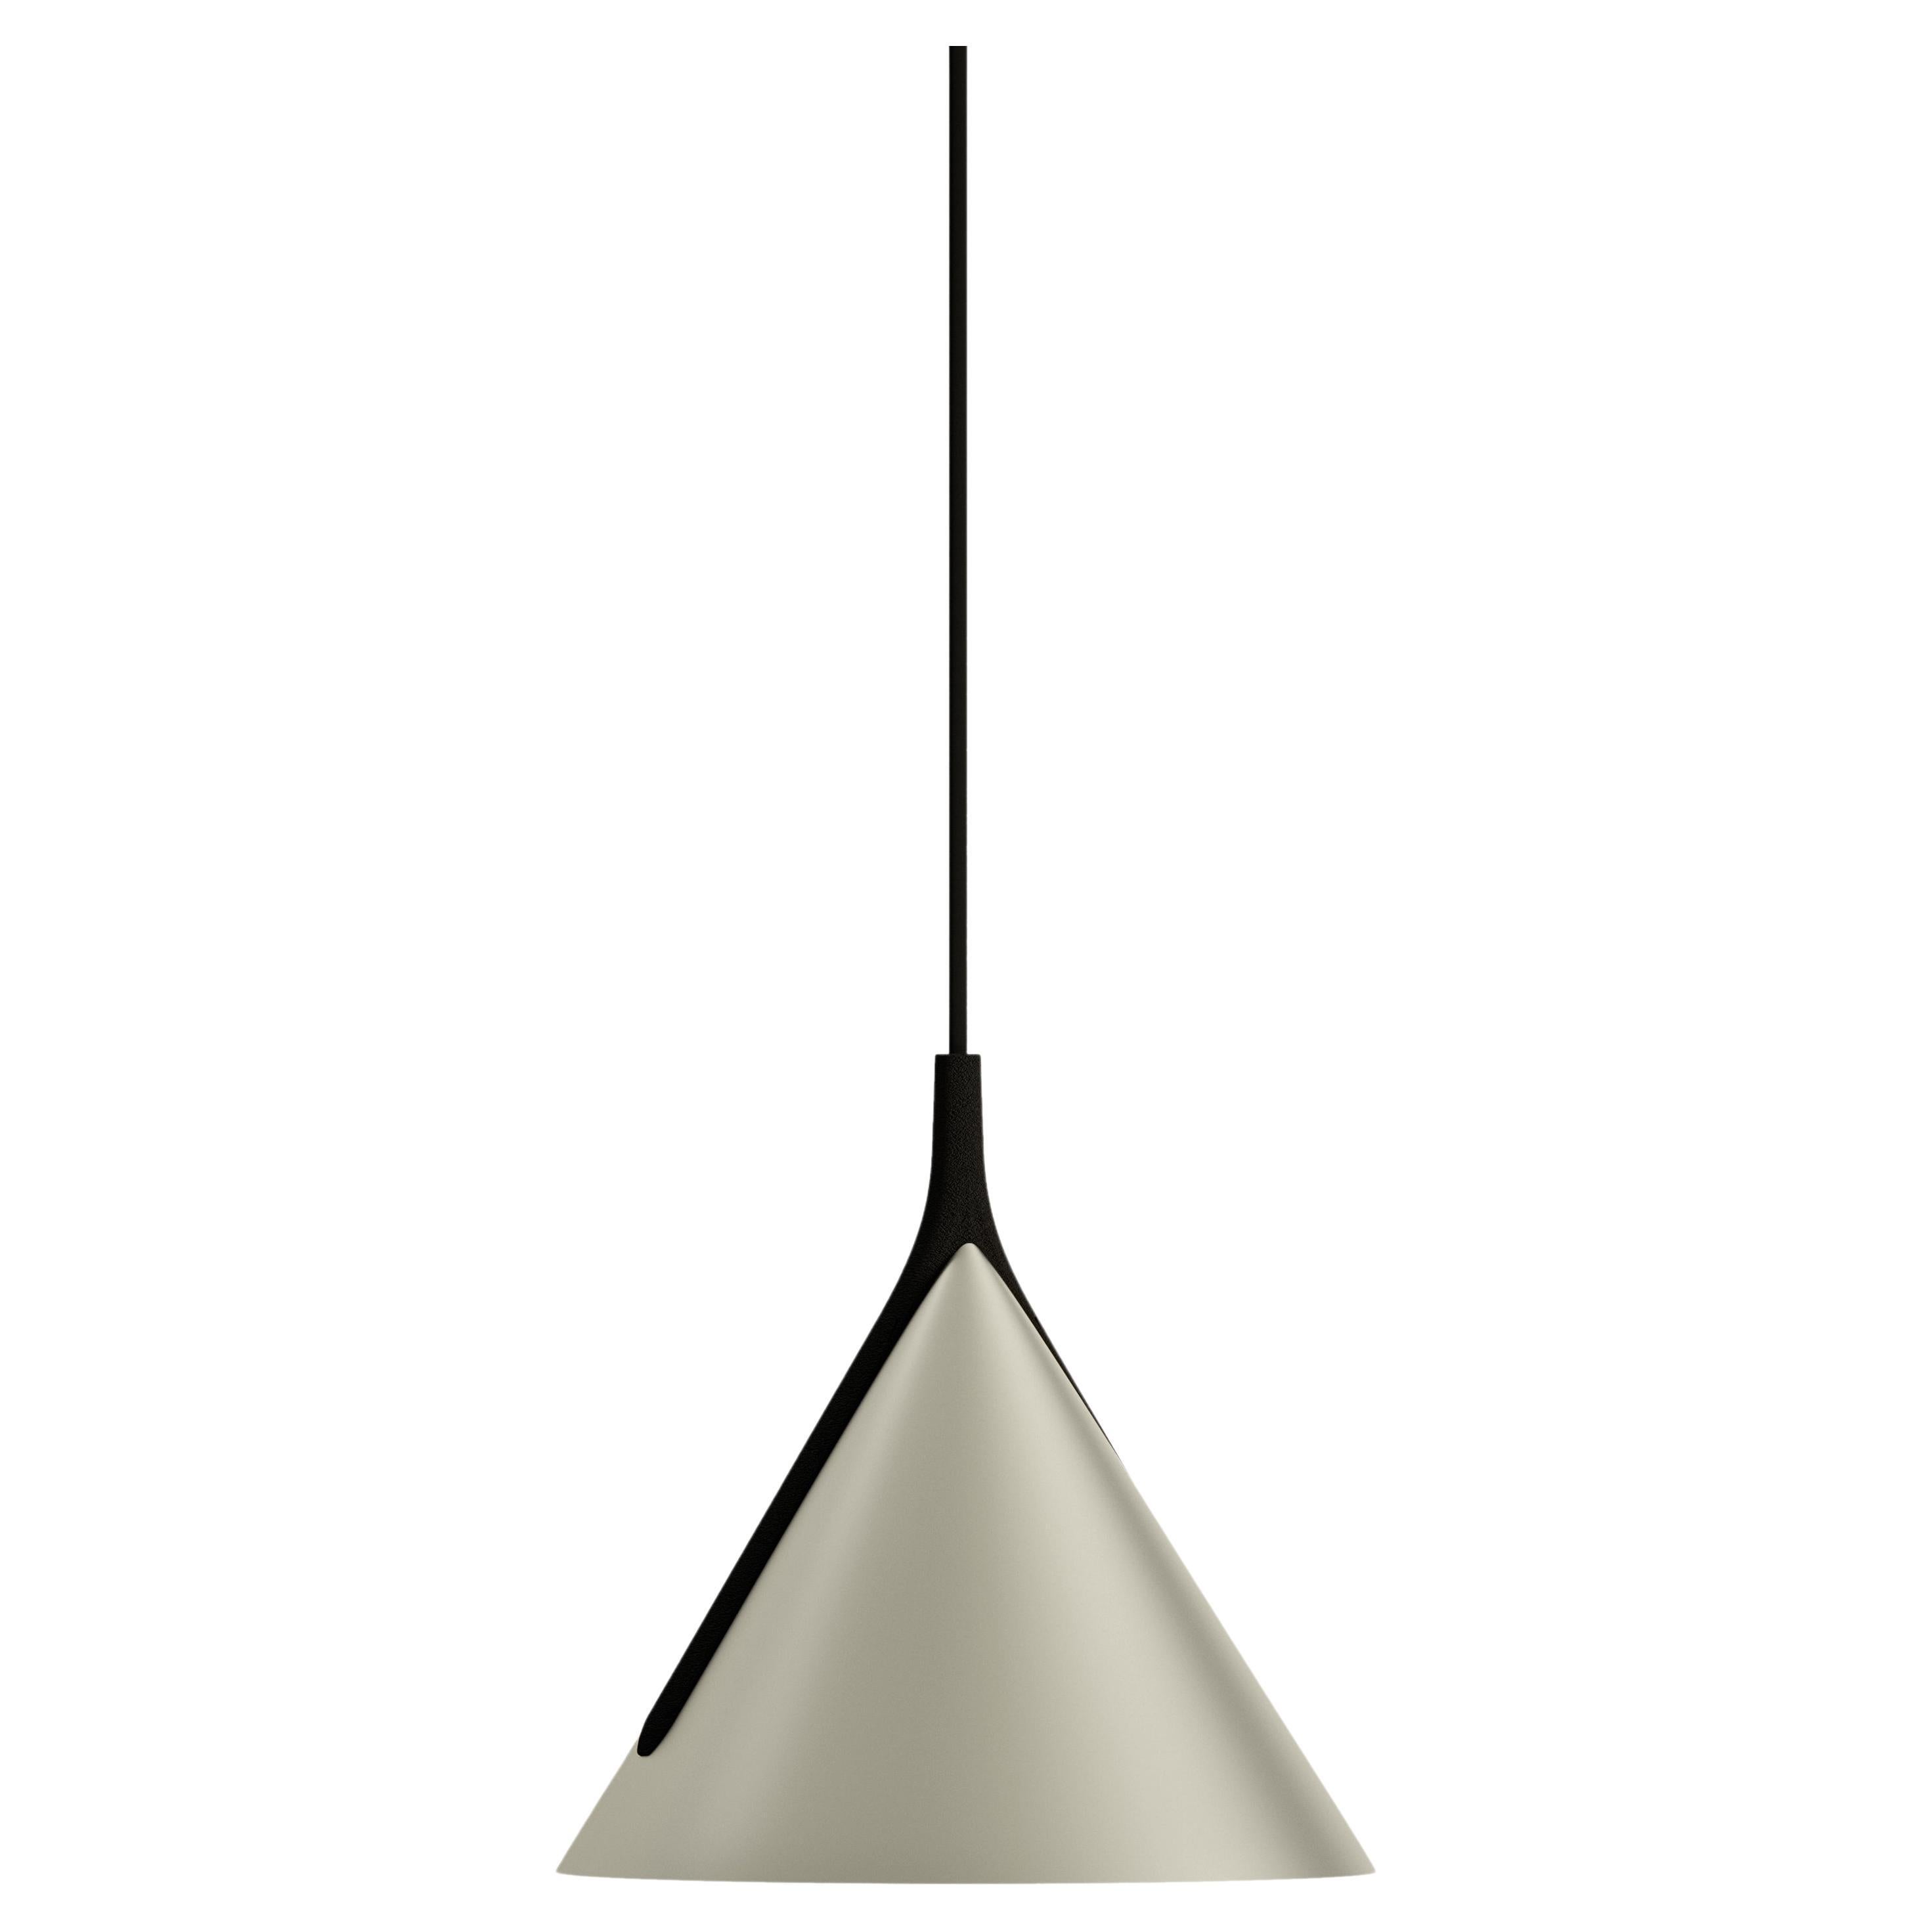 Axolight Jewel Mono Small Pendant Light in Greige with Black Finish by Yonoh For Sale